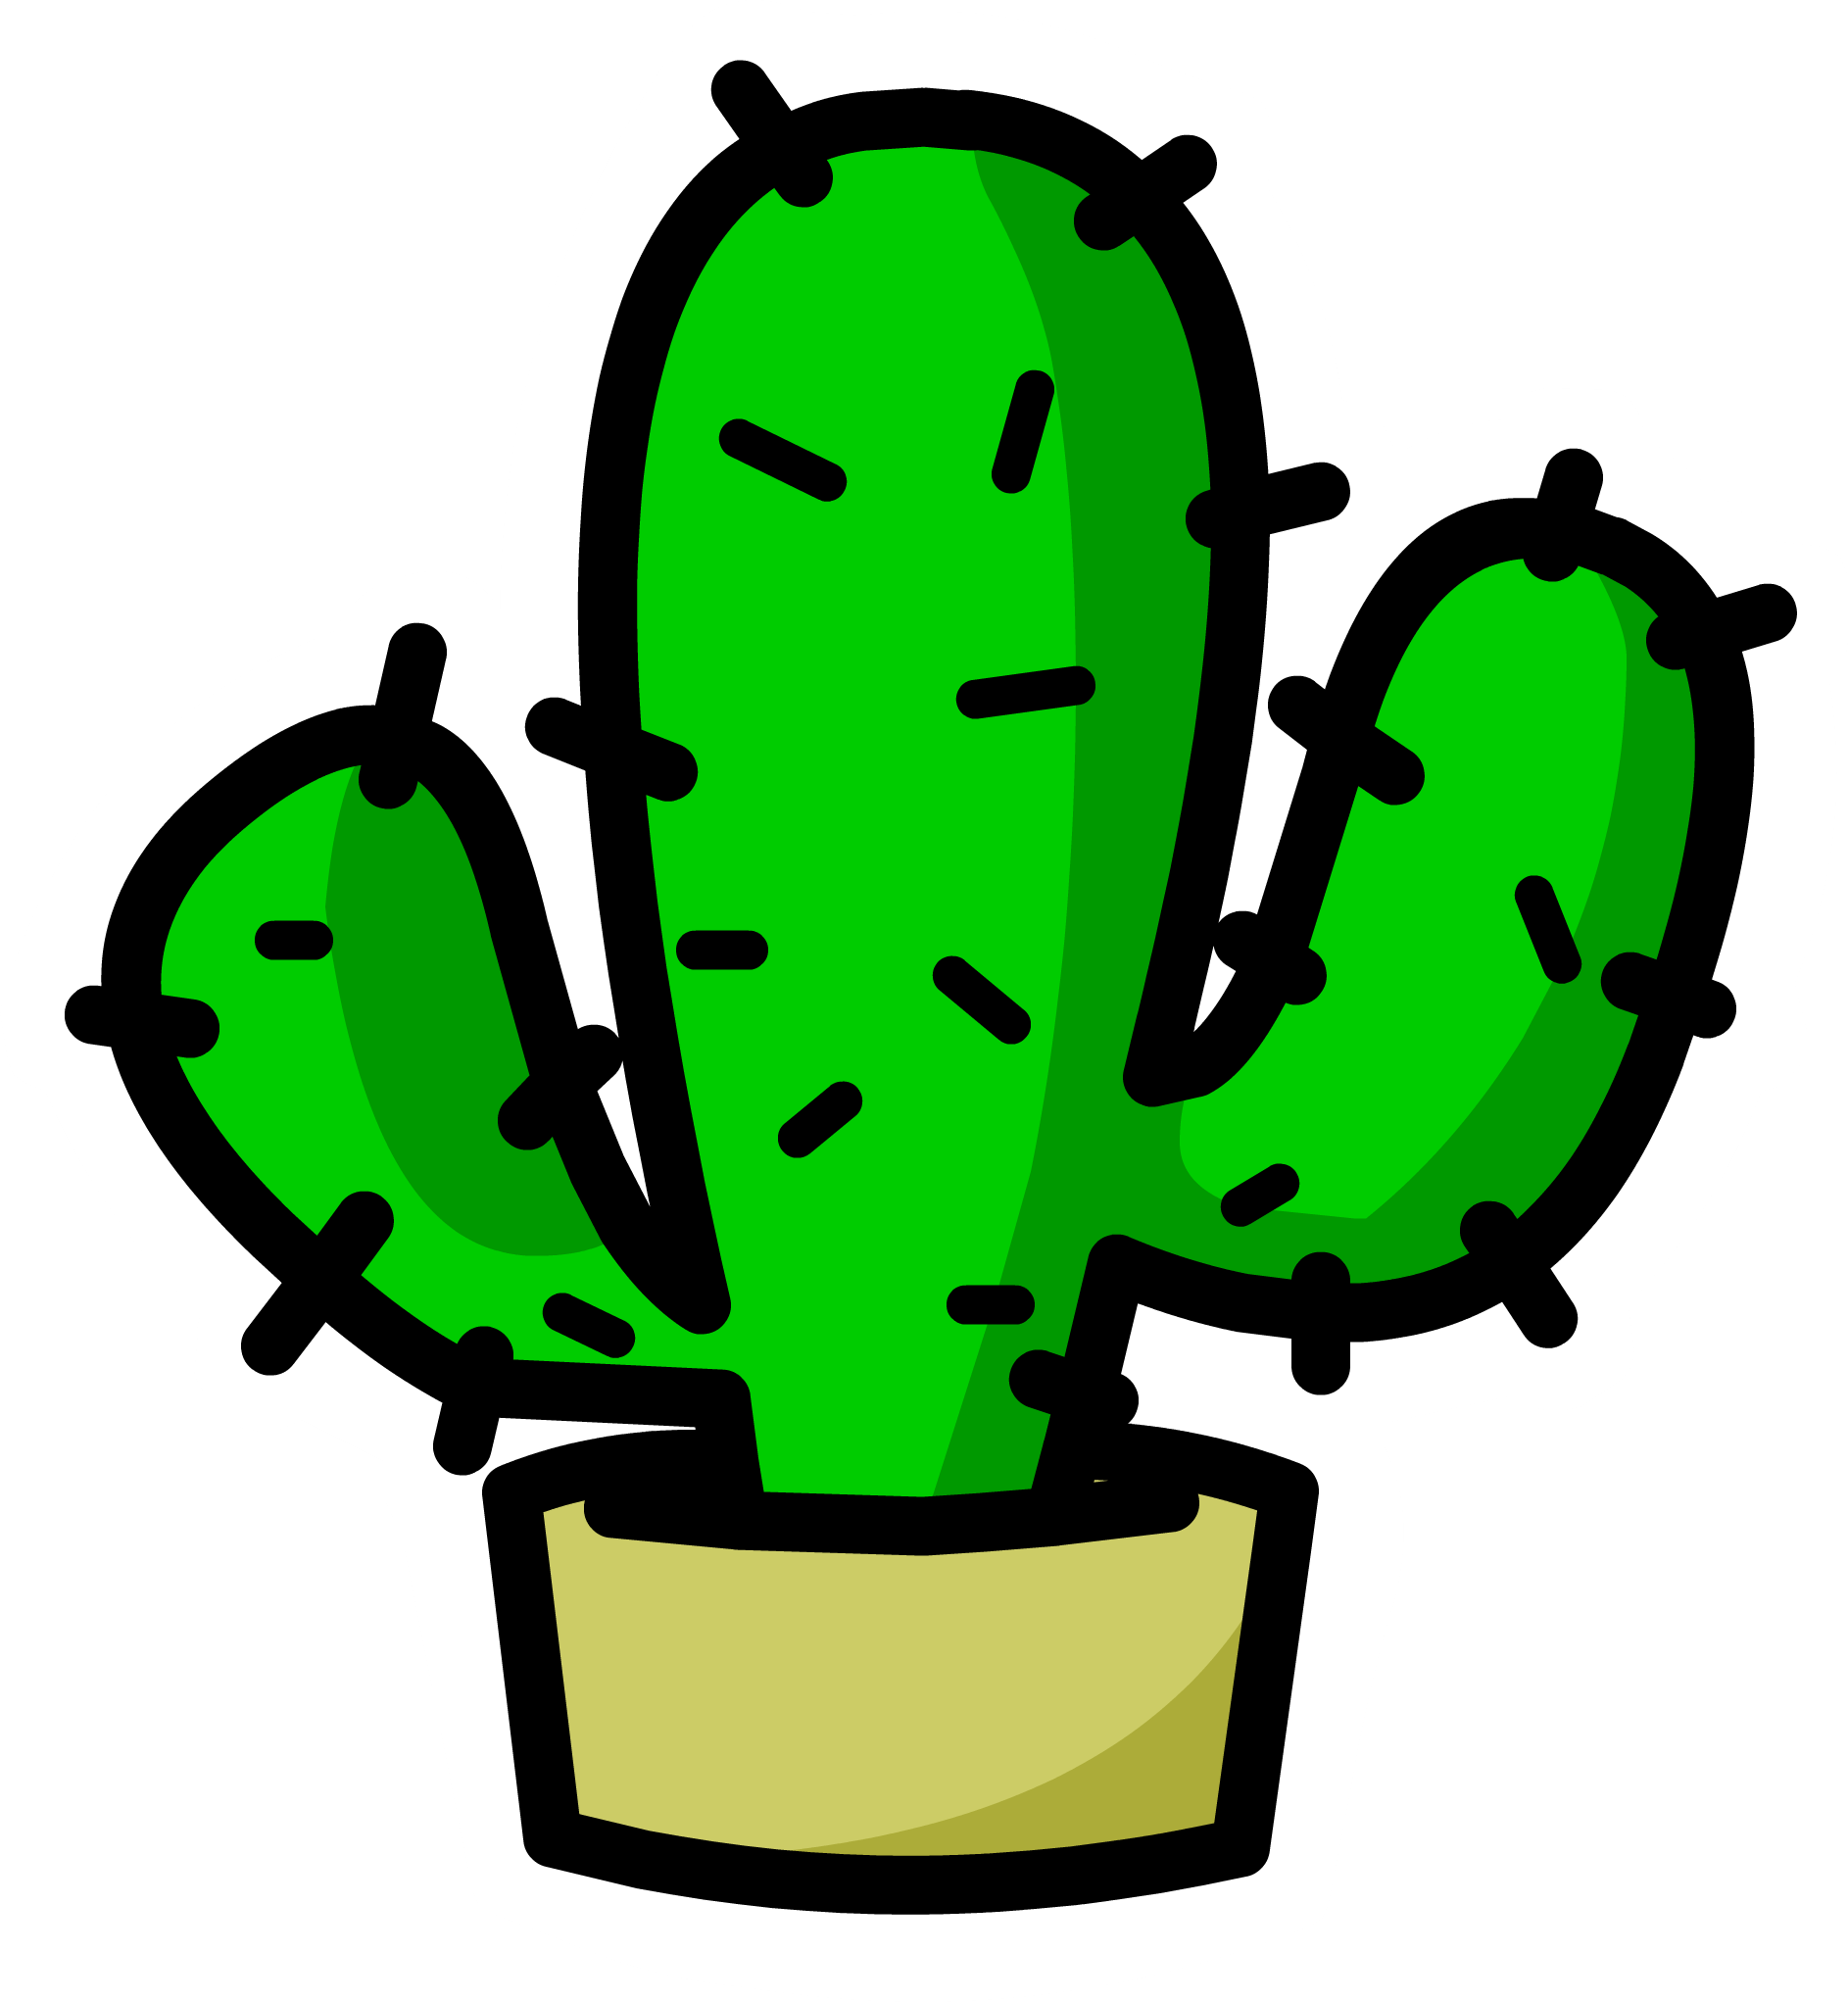 Image - Cactus Pin.PNG | Club Penguin Wiki | Fandom powered by Wikia